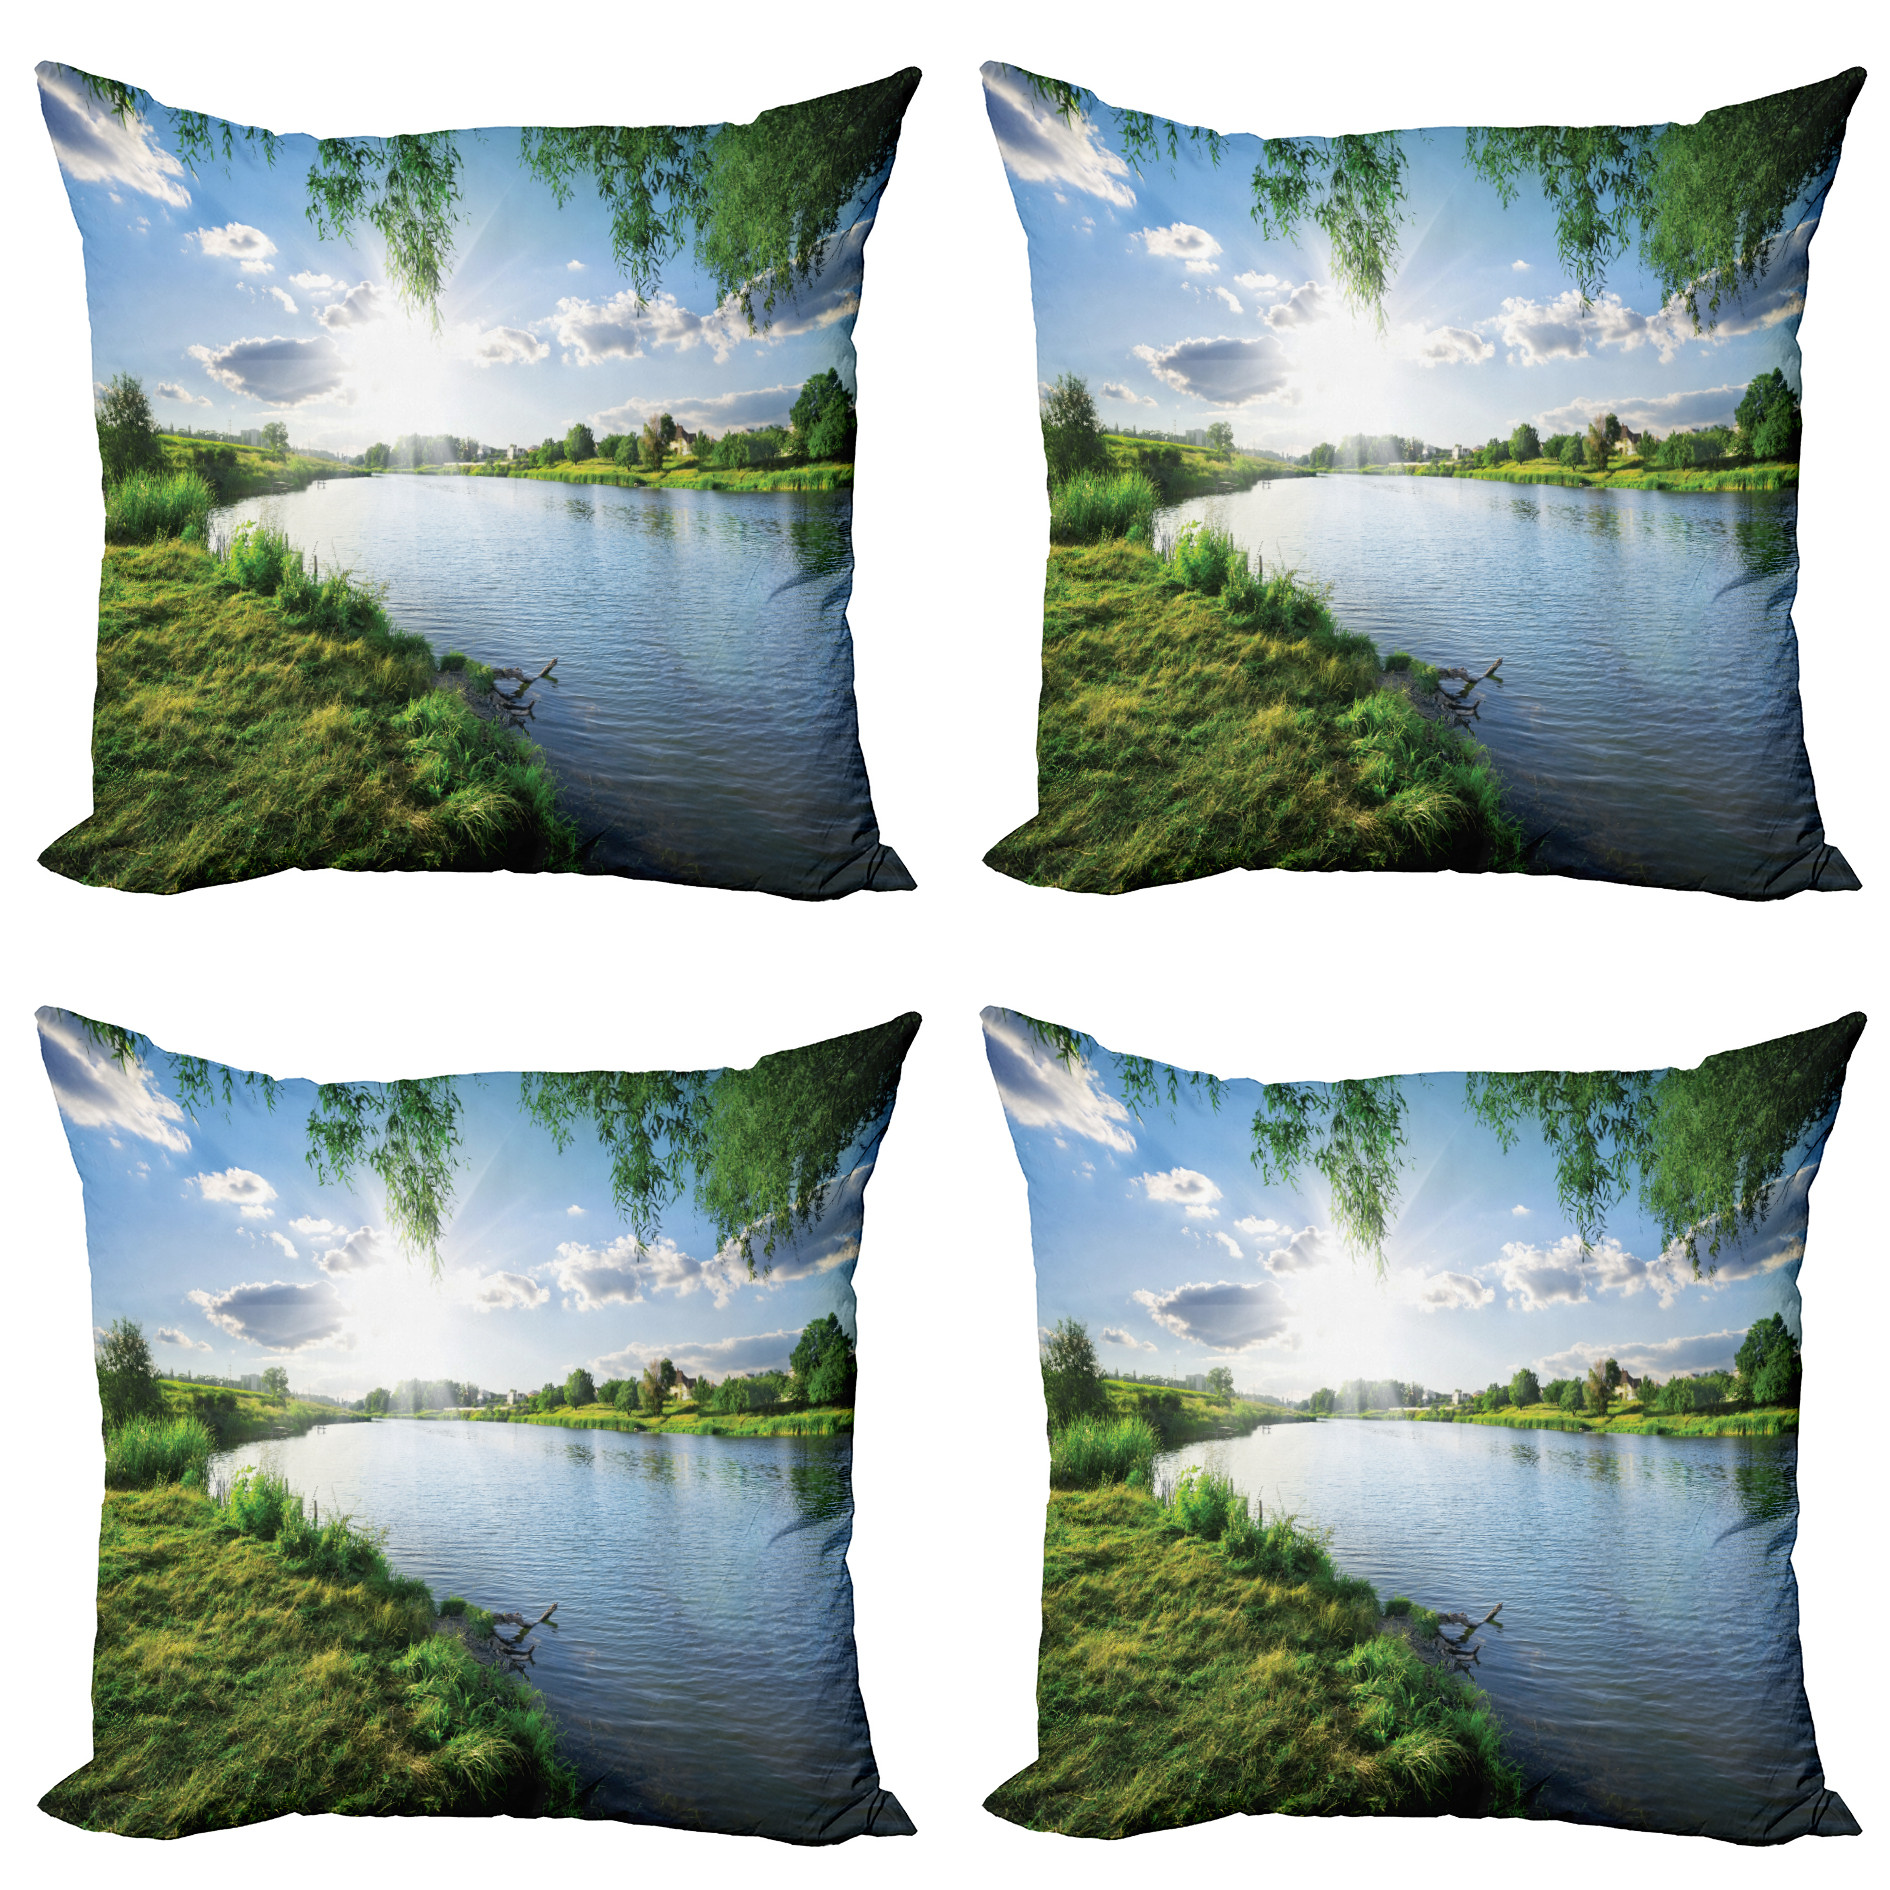 Nature Throw Pillow Cushion Case Pack of 4, Sunny Day on a Calm River in Summer Sunshines Greenery Grass Outdoors Cloud, Modern Accent Double-Sided Print, 4 Sizes, Fern Green Sky Blue, by Ambesonne - image 1 of 6